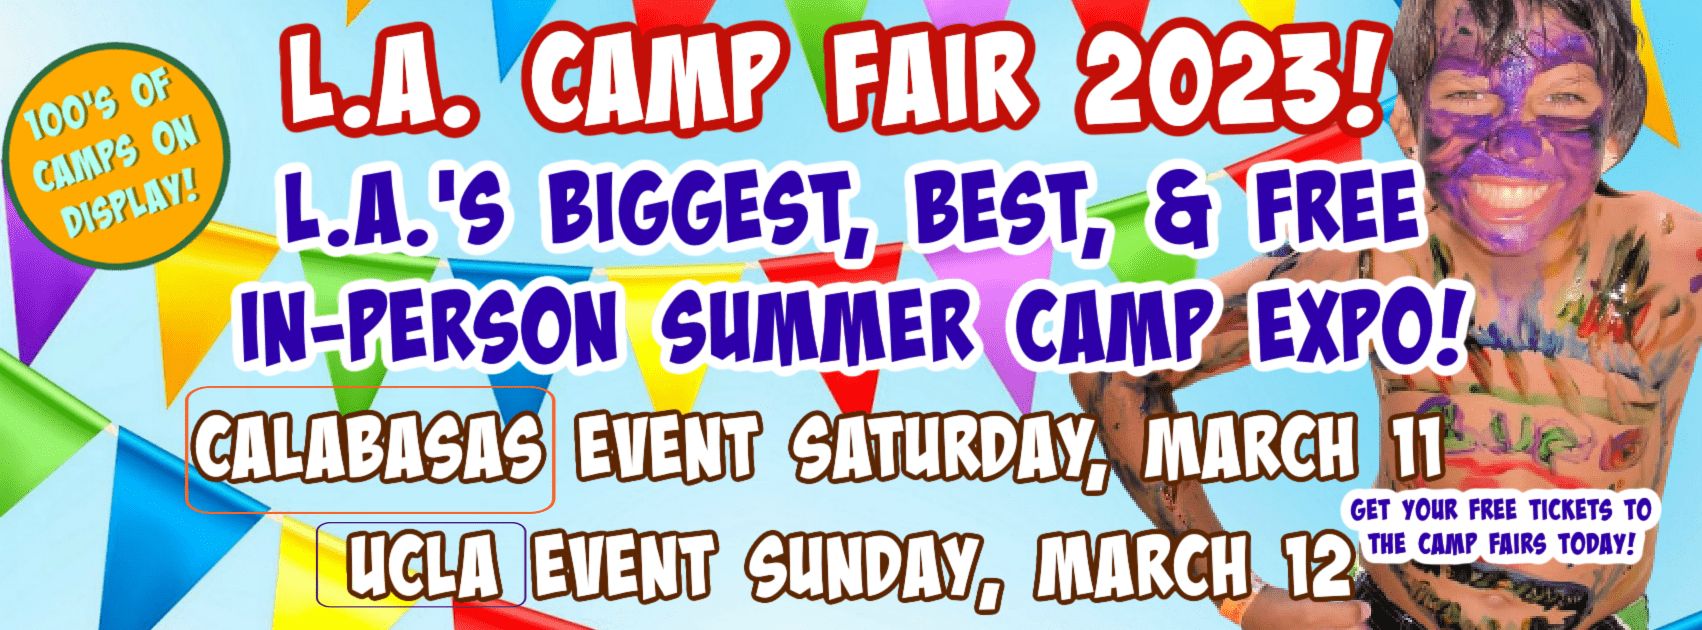 Large colorful banner promoting L.A. Camp Fair 2023 and its two in-person summer camp expos at UCLA and Calabasas.